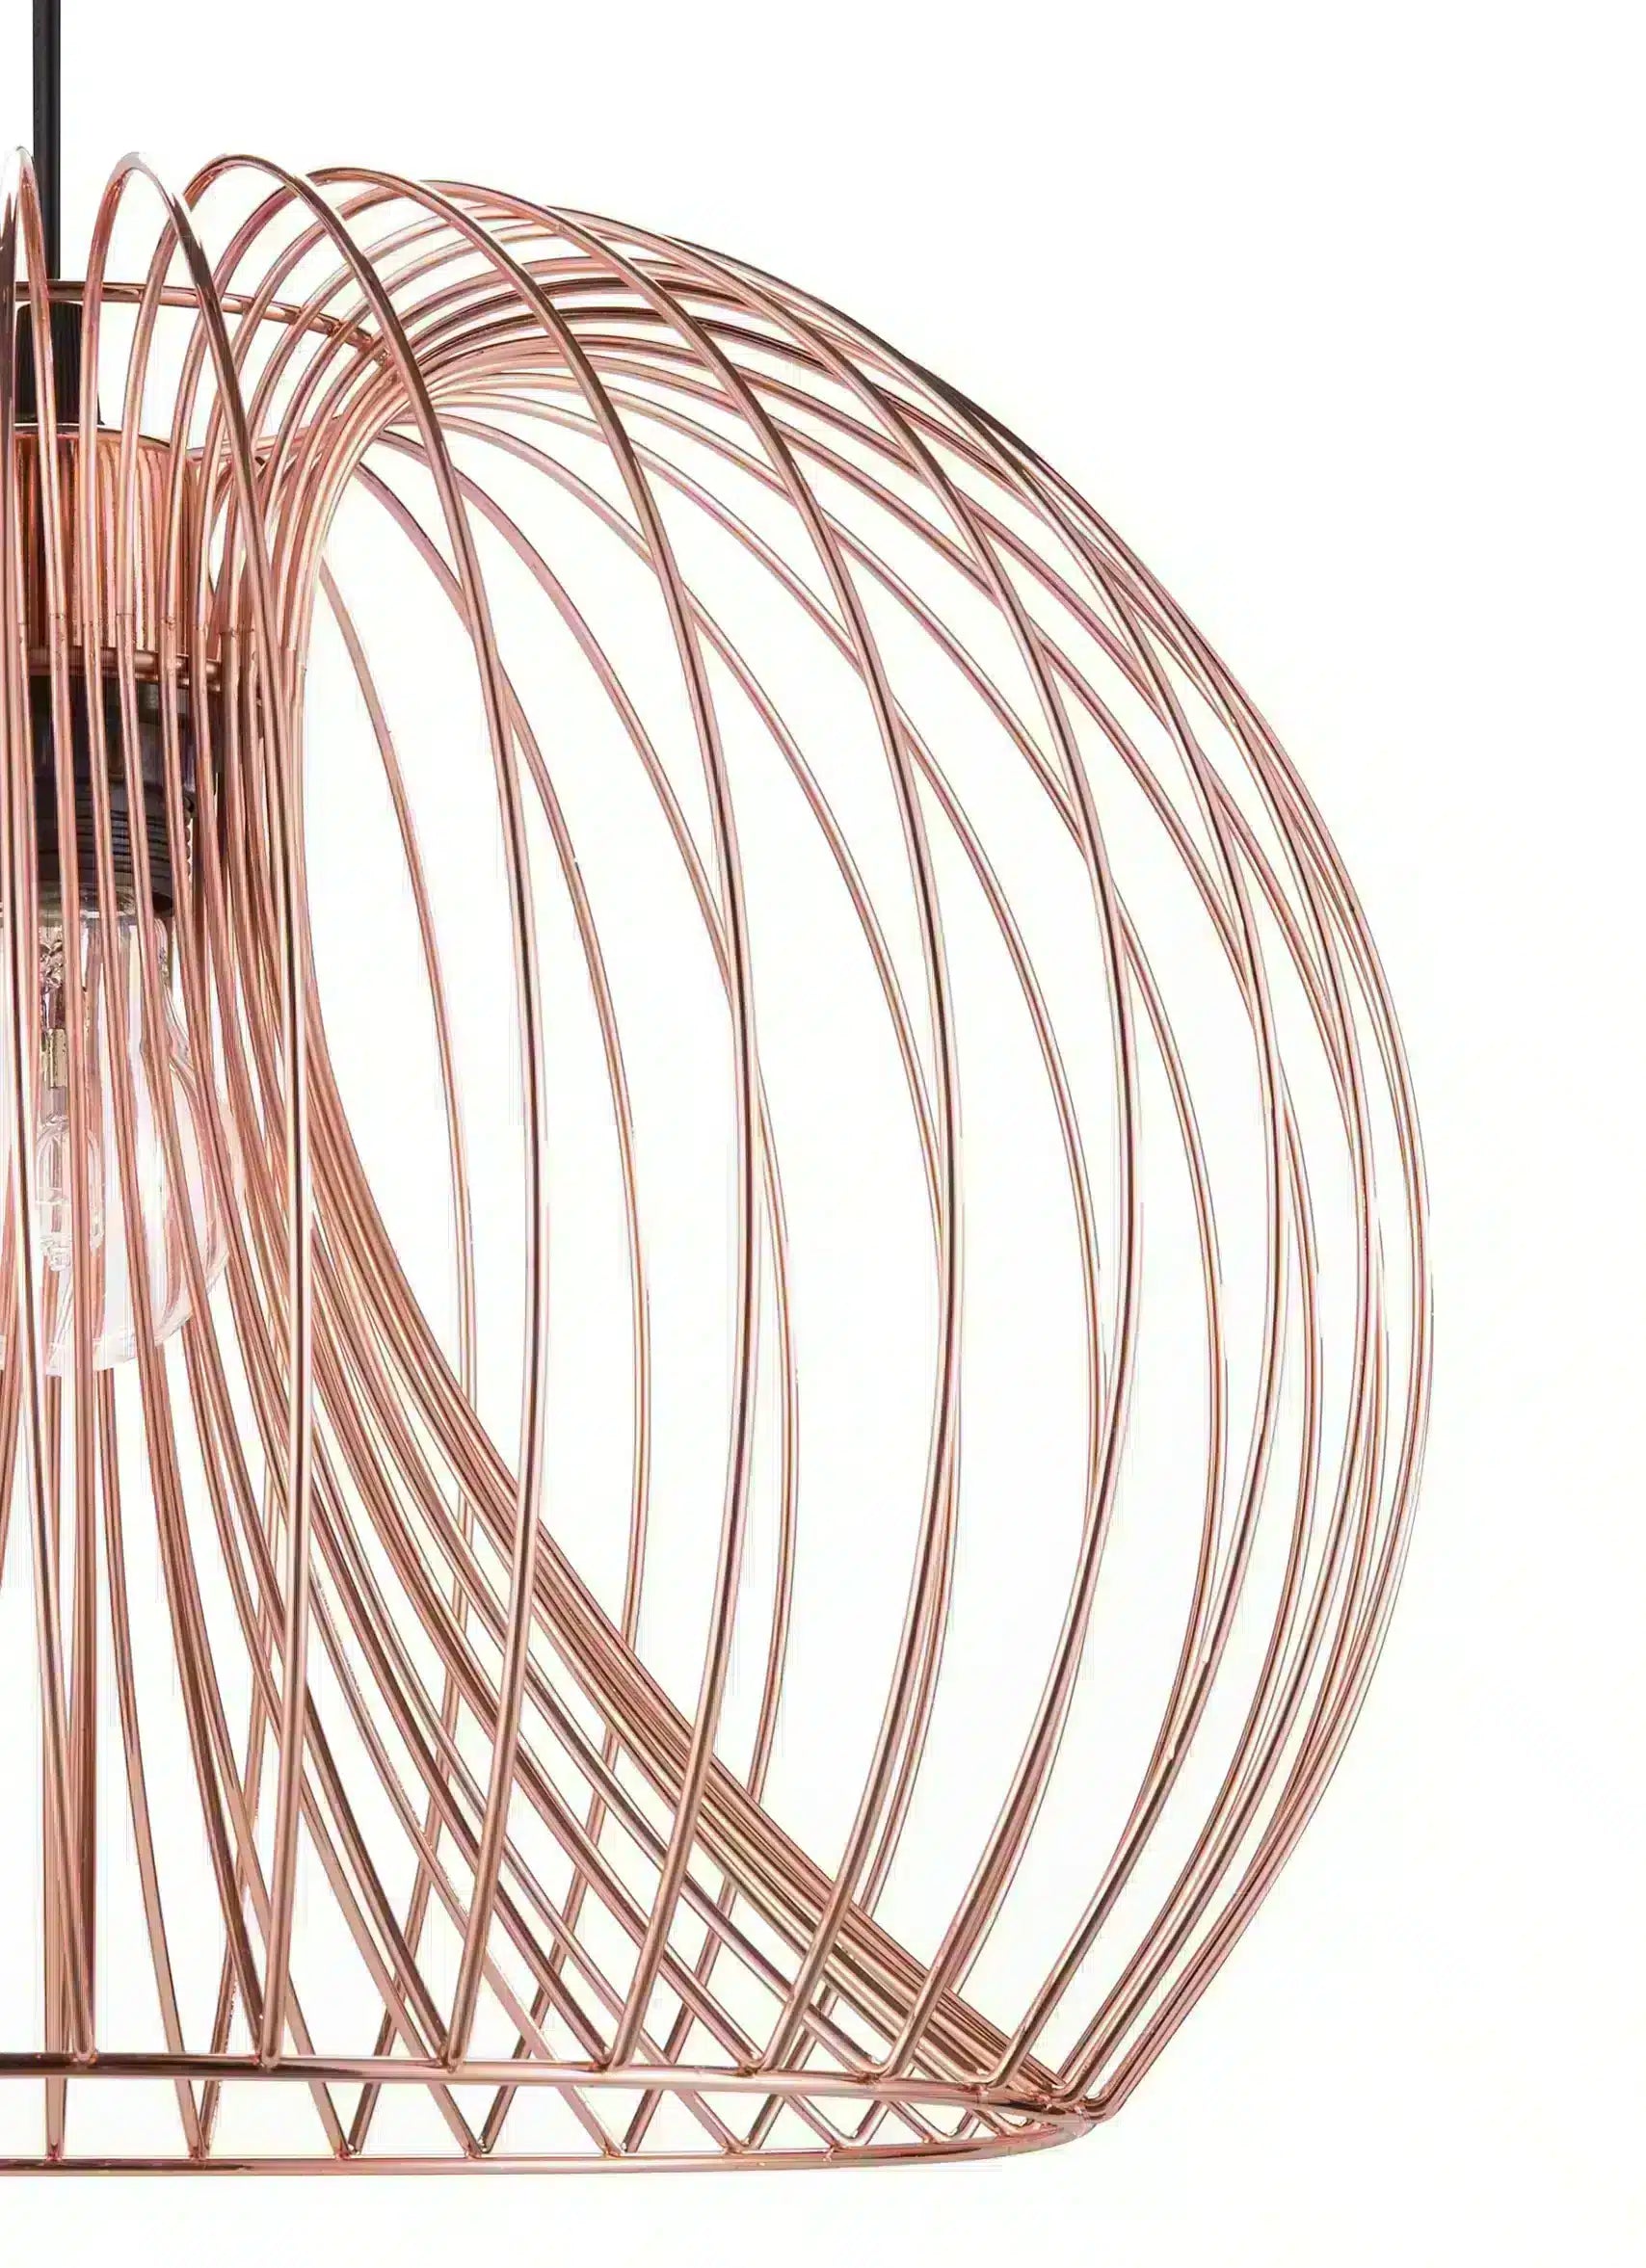 GoodHome Dharug Copper effect Pendant ceiling light, (Dia) 380mm 5321